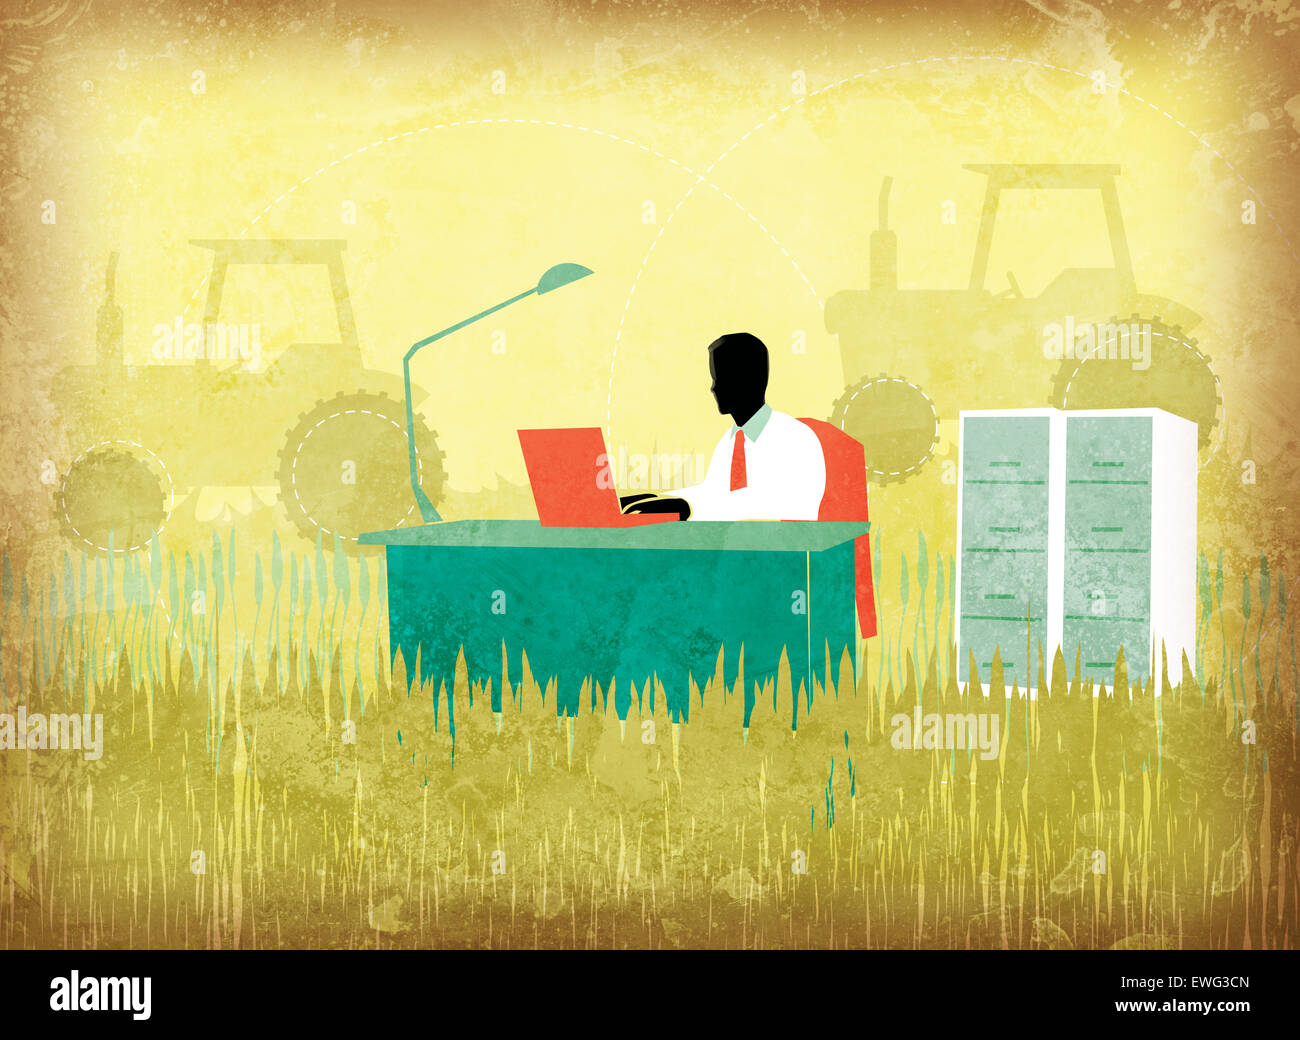 Illustration image of businessman using laptop on agricultural field Stock Photo